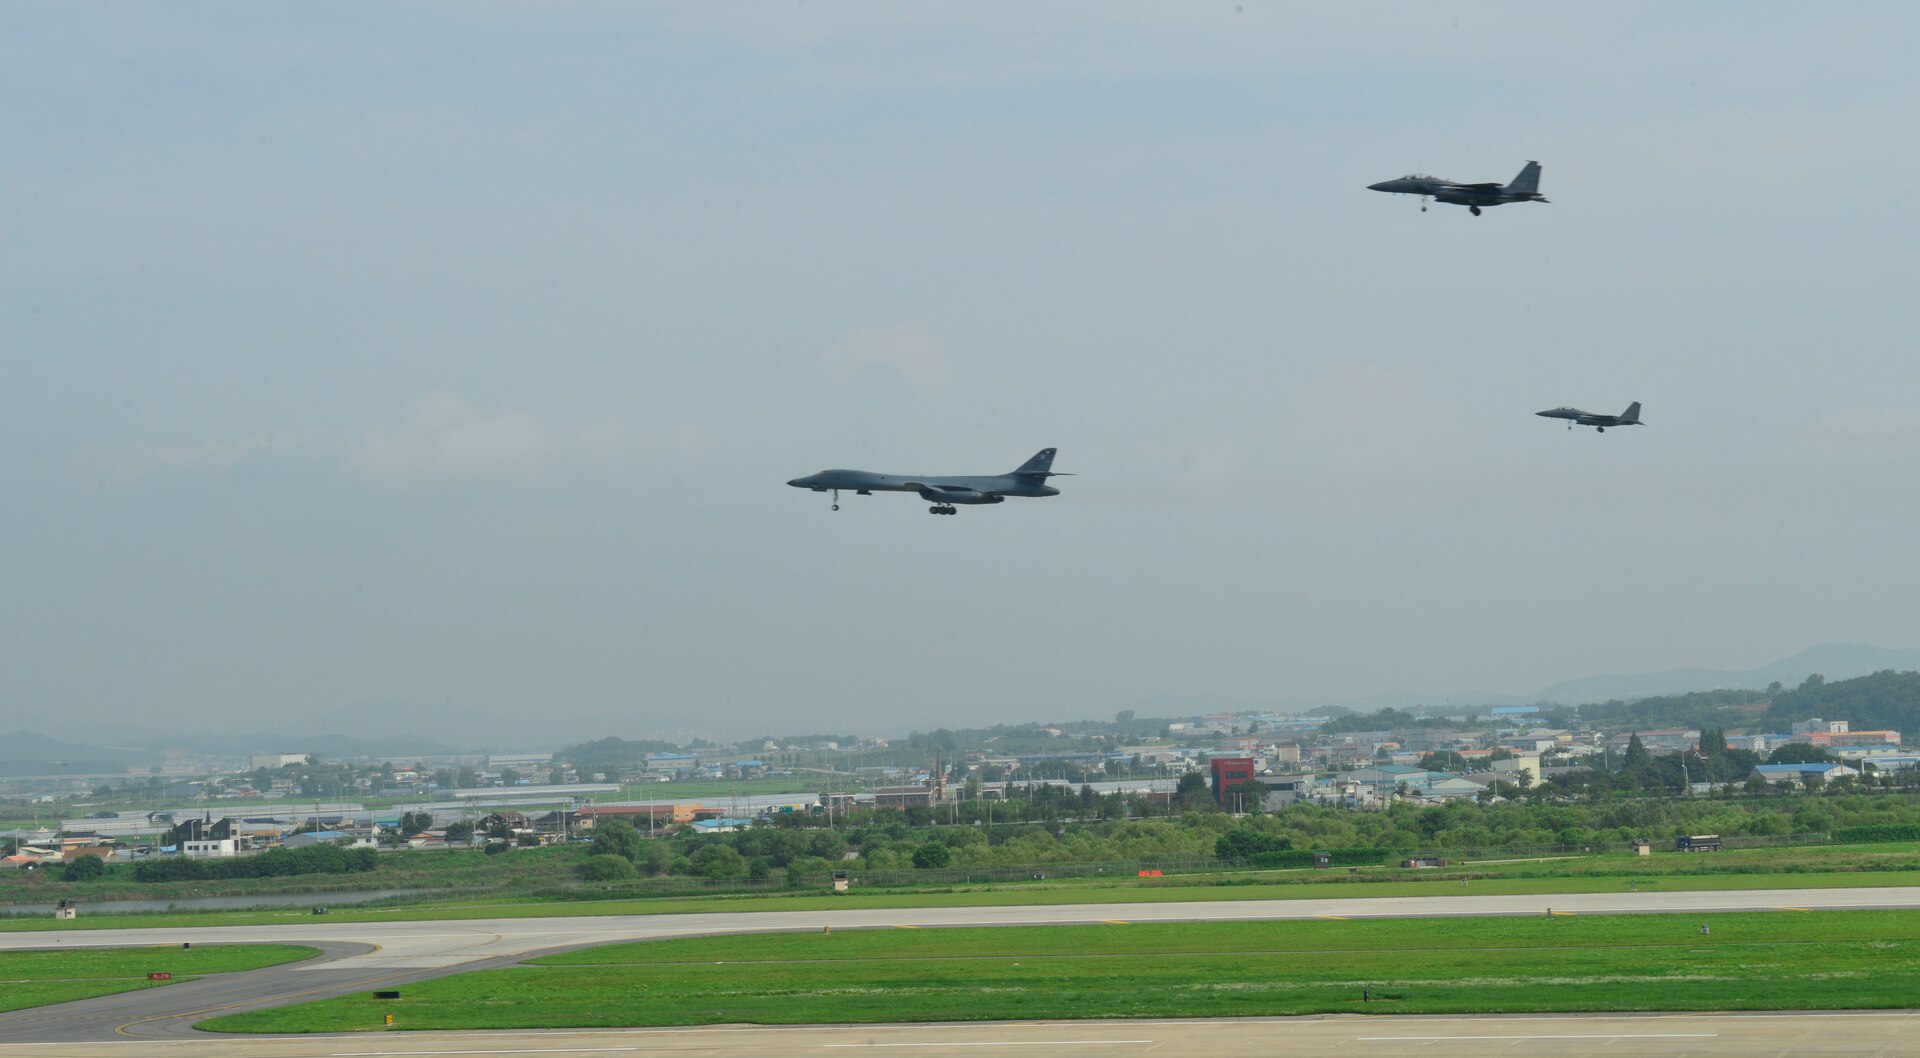 In a demonstration of ironclad U.S. commitment to our allies, two U.S. Air Force B-1B Lancers assigned to the 9th Expeditionary Bomb Squadron, deployed from Dyess Air Force Base, Texas, perform a low pass over Osan Air Base, Republic of Korea, during a 10-hour mission from Andersen Air Force Base, Guam, into Japanese airspace and over the Korean Peninsula, July 30, 2017. The B-1s first made contact with Japan Air Self-Defense Force F-2 fighter jets in Japanese airspace, then proceeded over the Korean Peninsula and were joined by South Korean F-15 fighter jets. This mission is in direct response to North Korea’s escalatory launch of intercontinental ballistic missiles on July 3 and 28.  (U.S. Air Force photo/Tech. Sgt. Benjamin Wiseman)